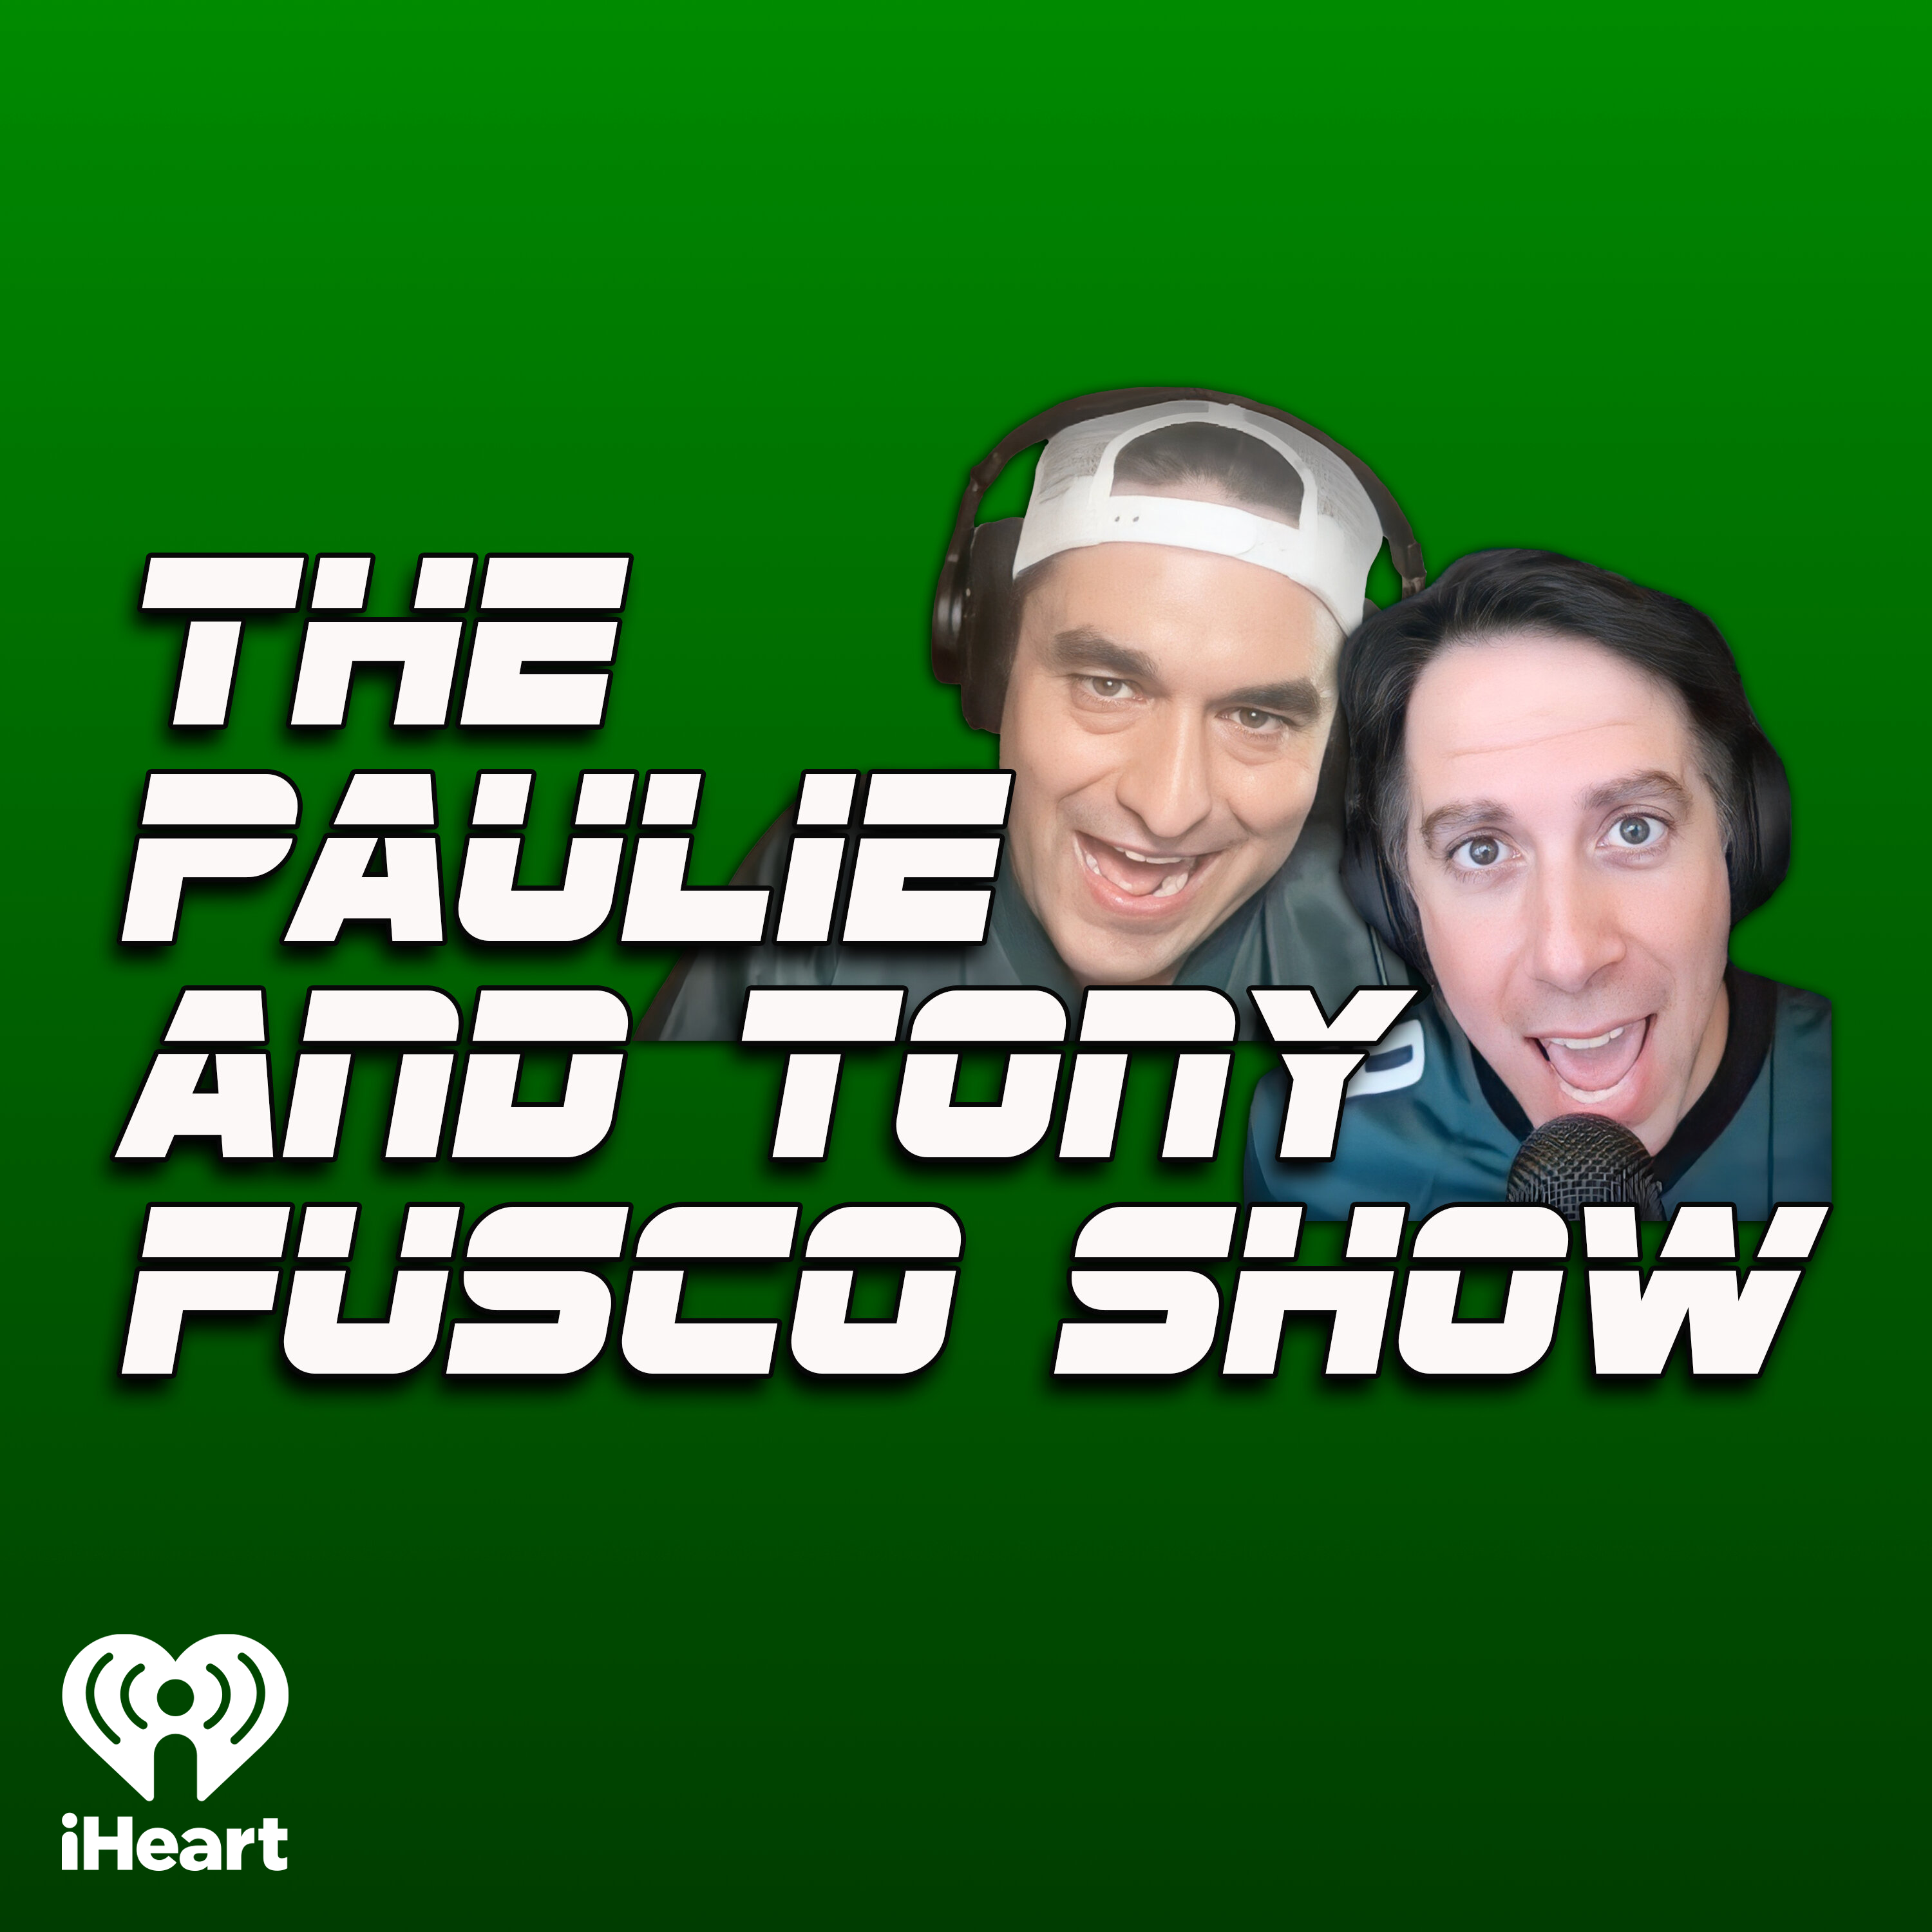 The Paulie & Tony Fusco Show: NFL QB Bubby Brister weighs in on Caleb Williams pink nails controversy